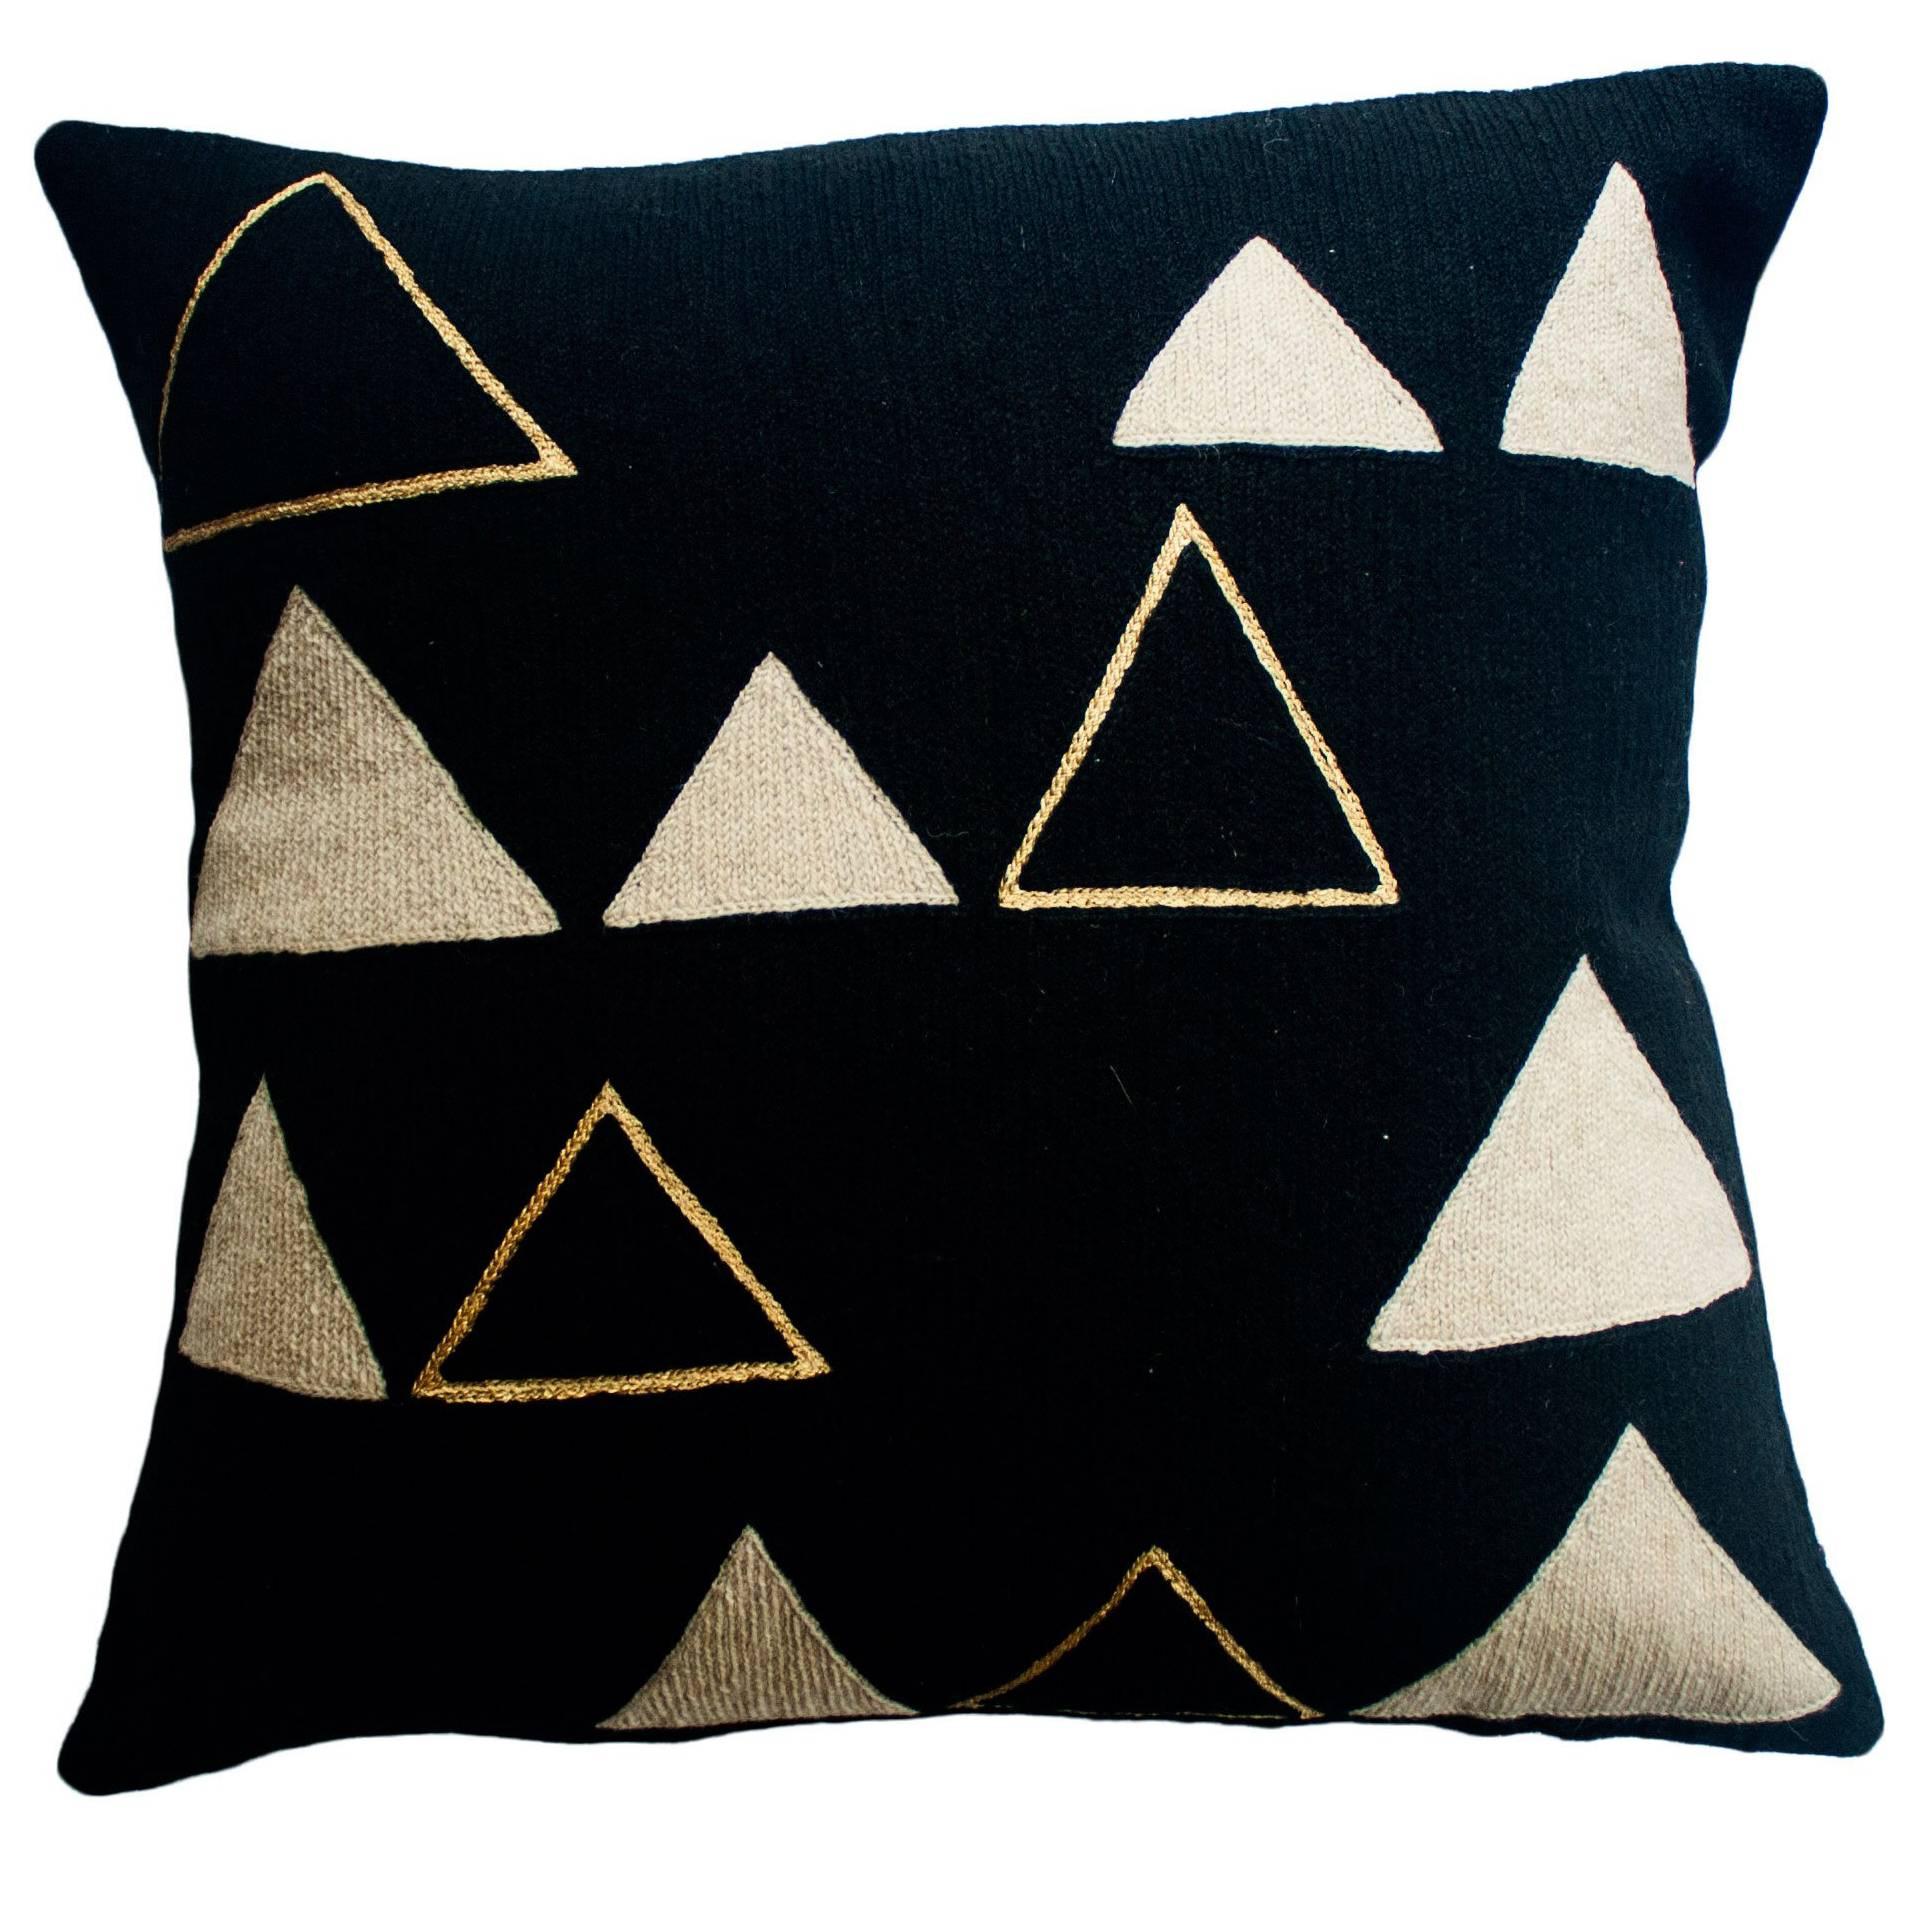 Anaya Mountain Gold Hand Embroidered Modern Geometric Throw Pillow Cover